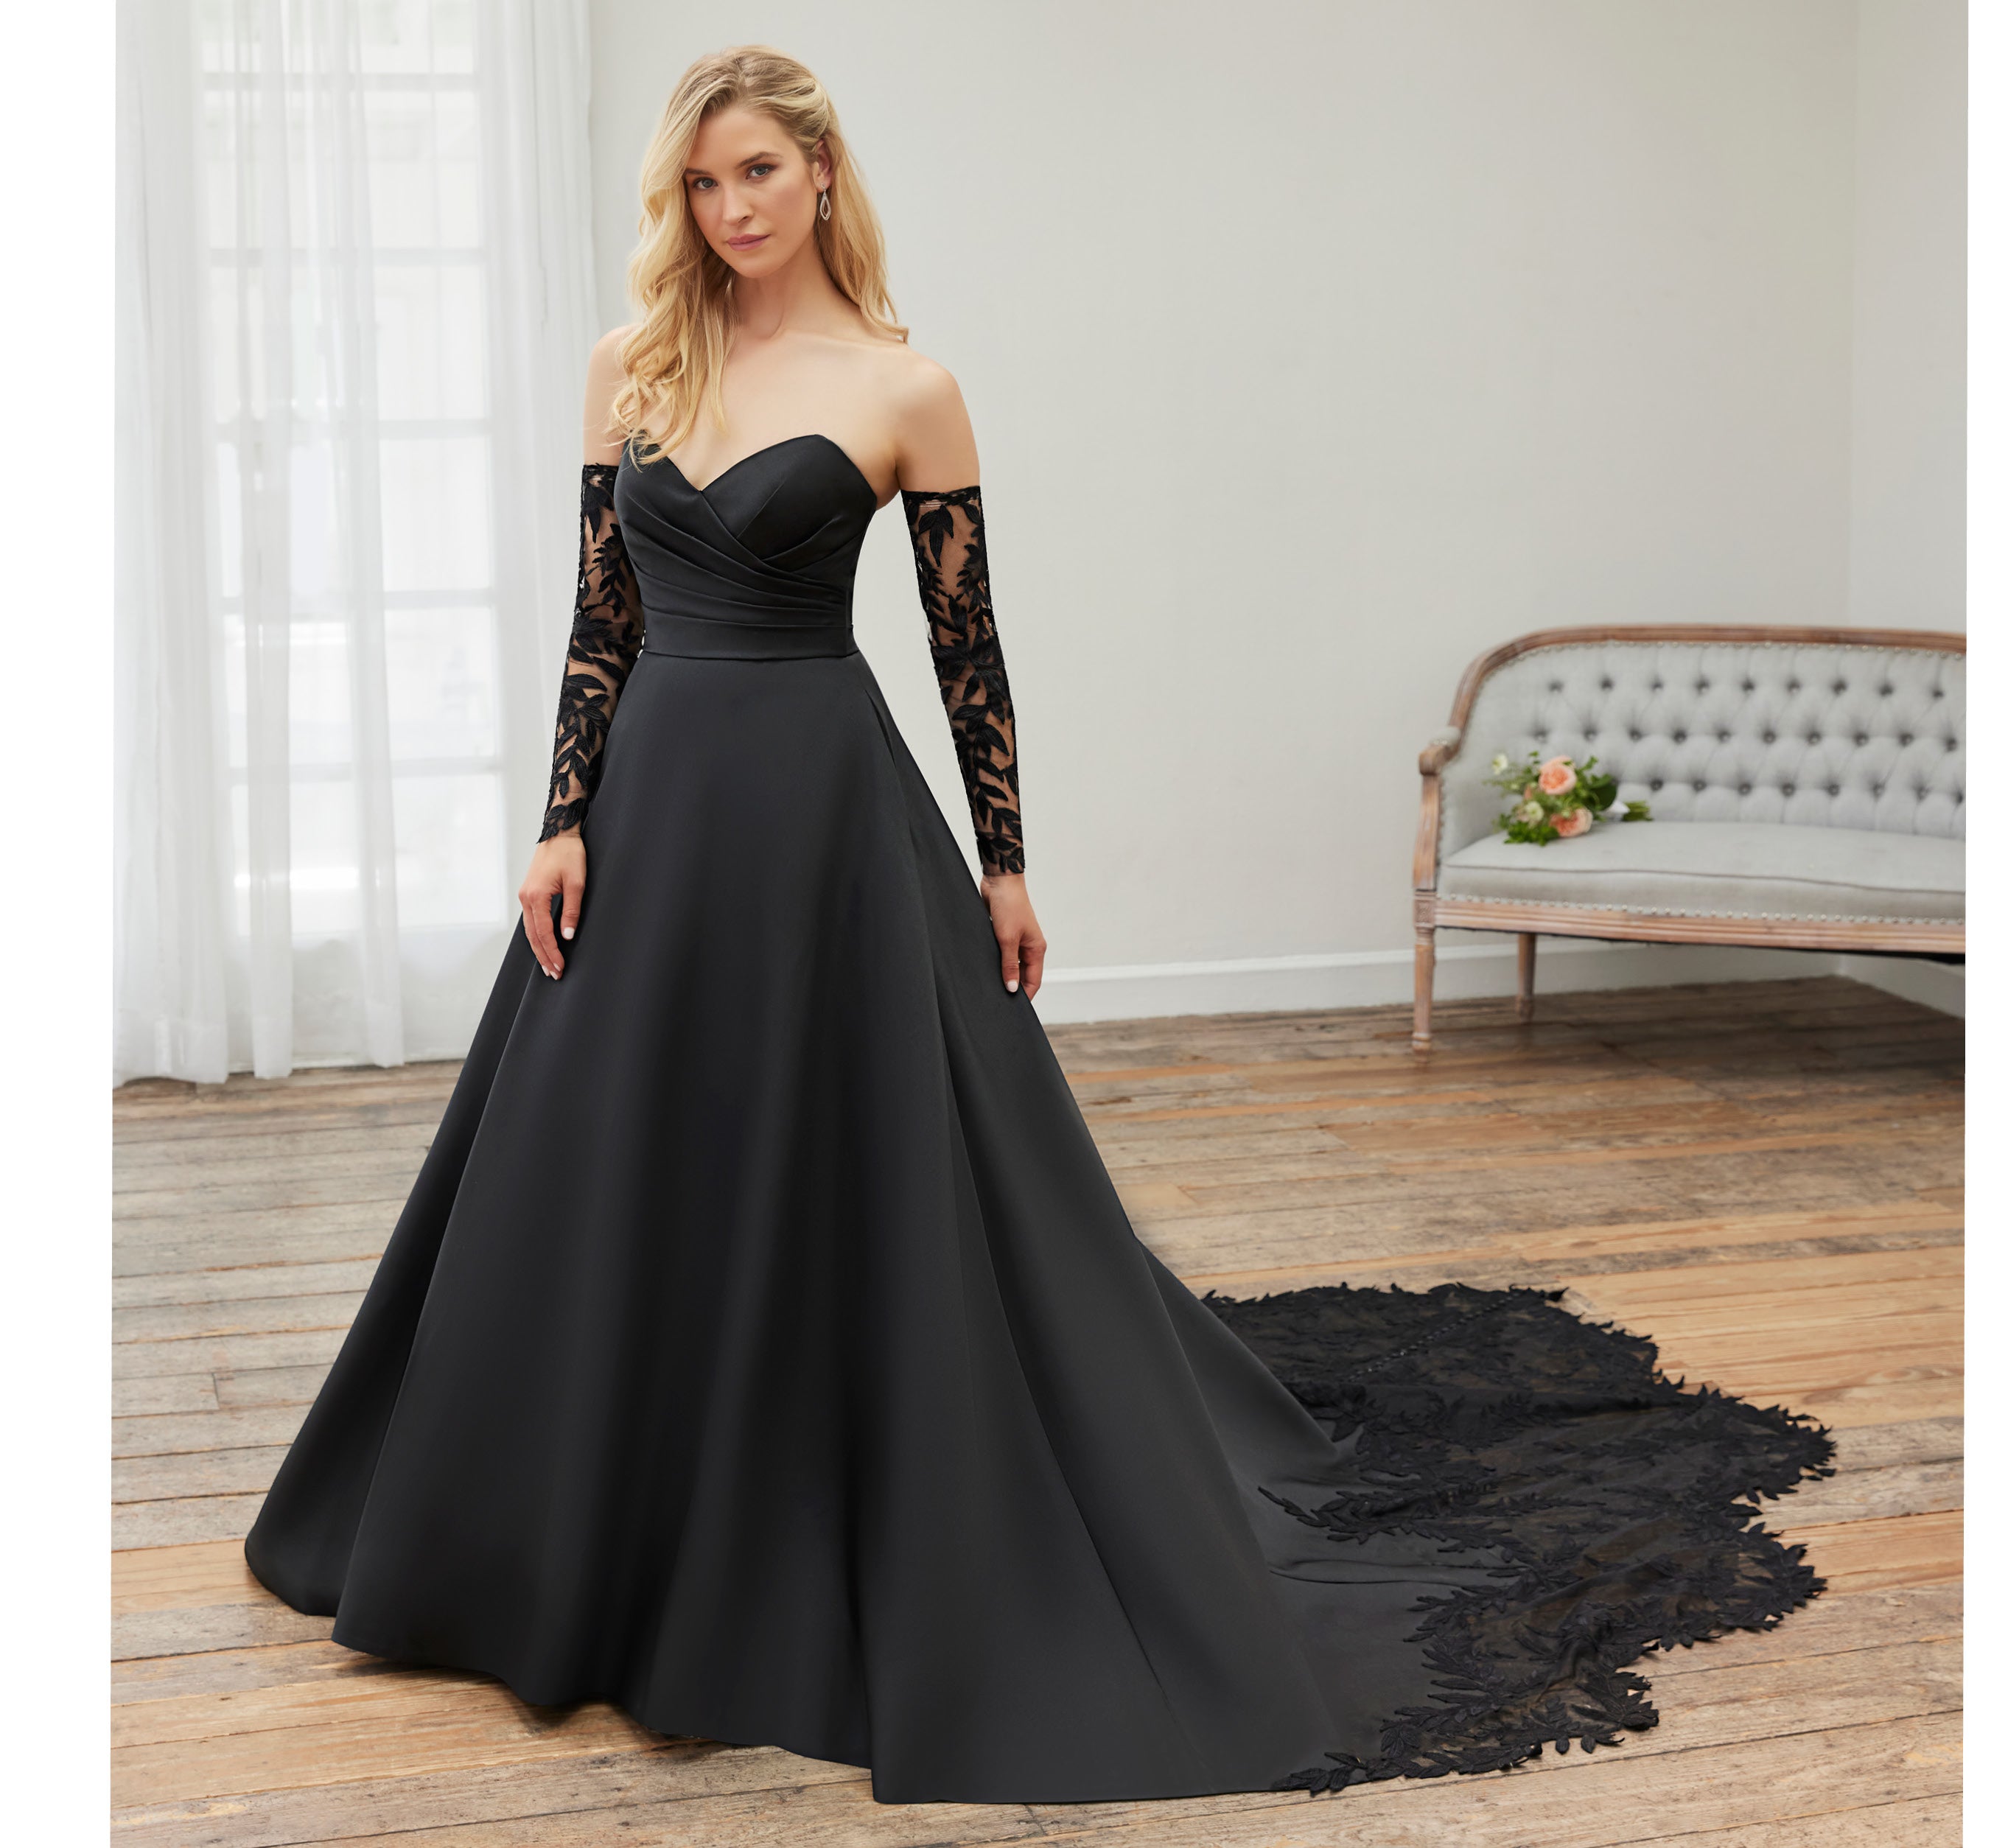 Black Lace Long Sleeves Mermaid Prom Dresses with Long Train,3366 – BohoProm